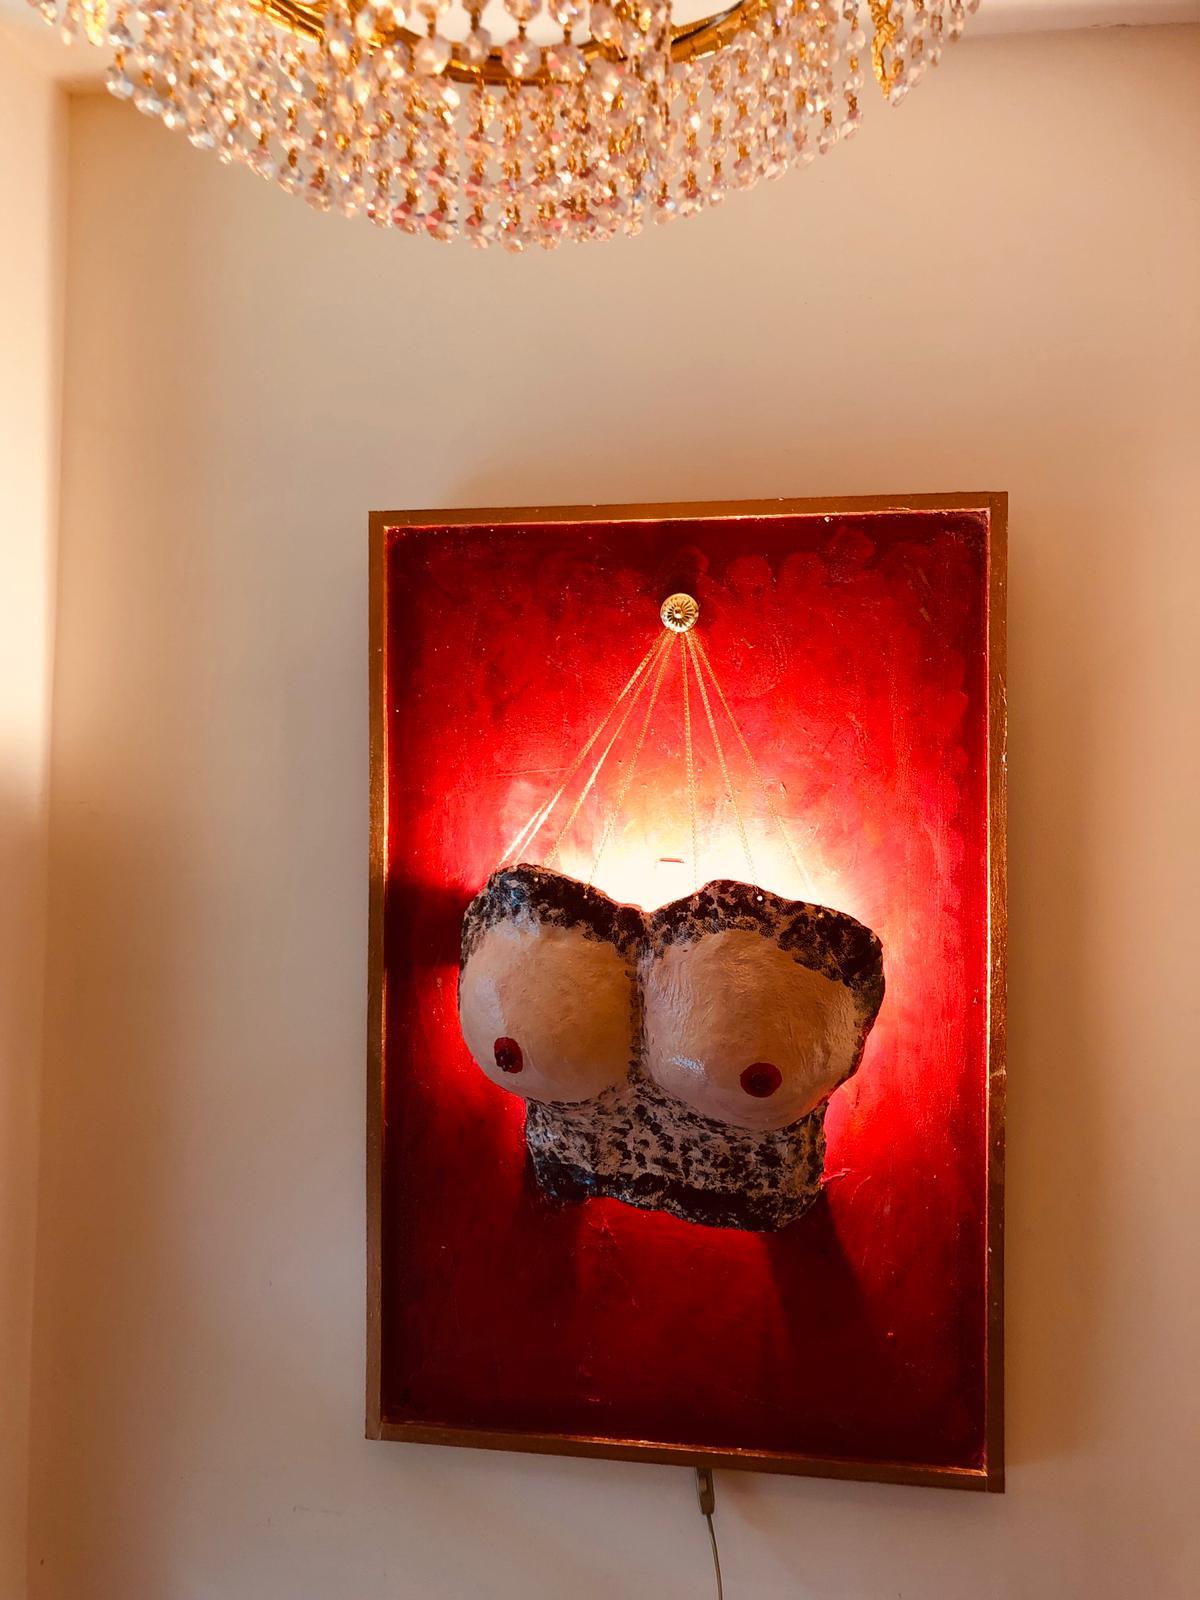 This is a unique piece from the 'Naked Breasts' collection. Here you can see a painting where ceramic parts are attached. The ceramic is attached to 24-carat gold-plated chains that come together at the top. The image is illuminated with two lamps!